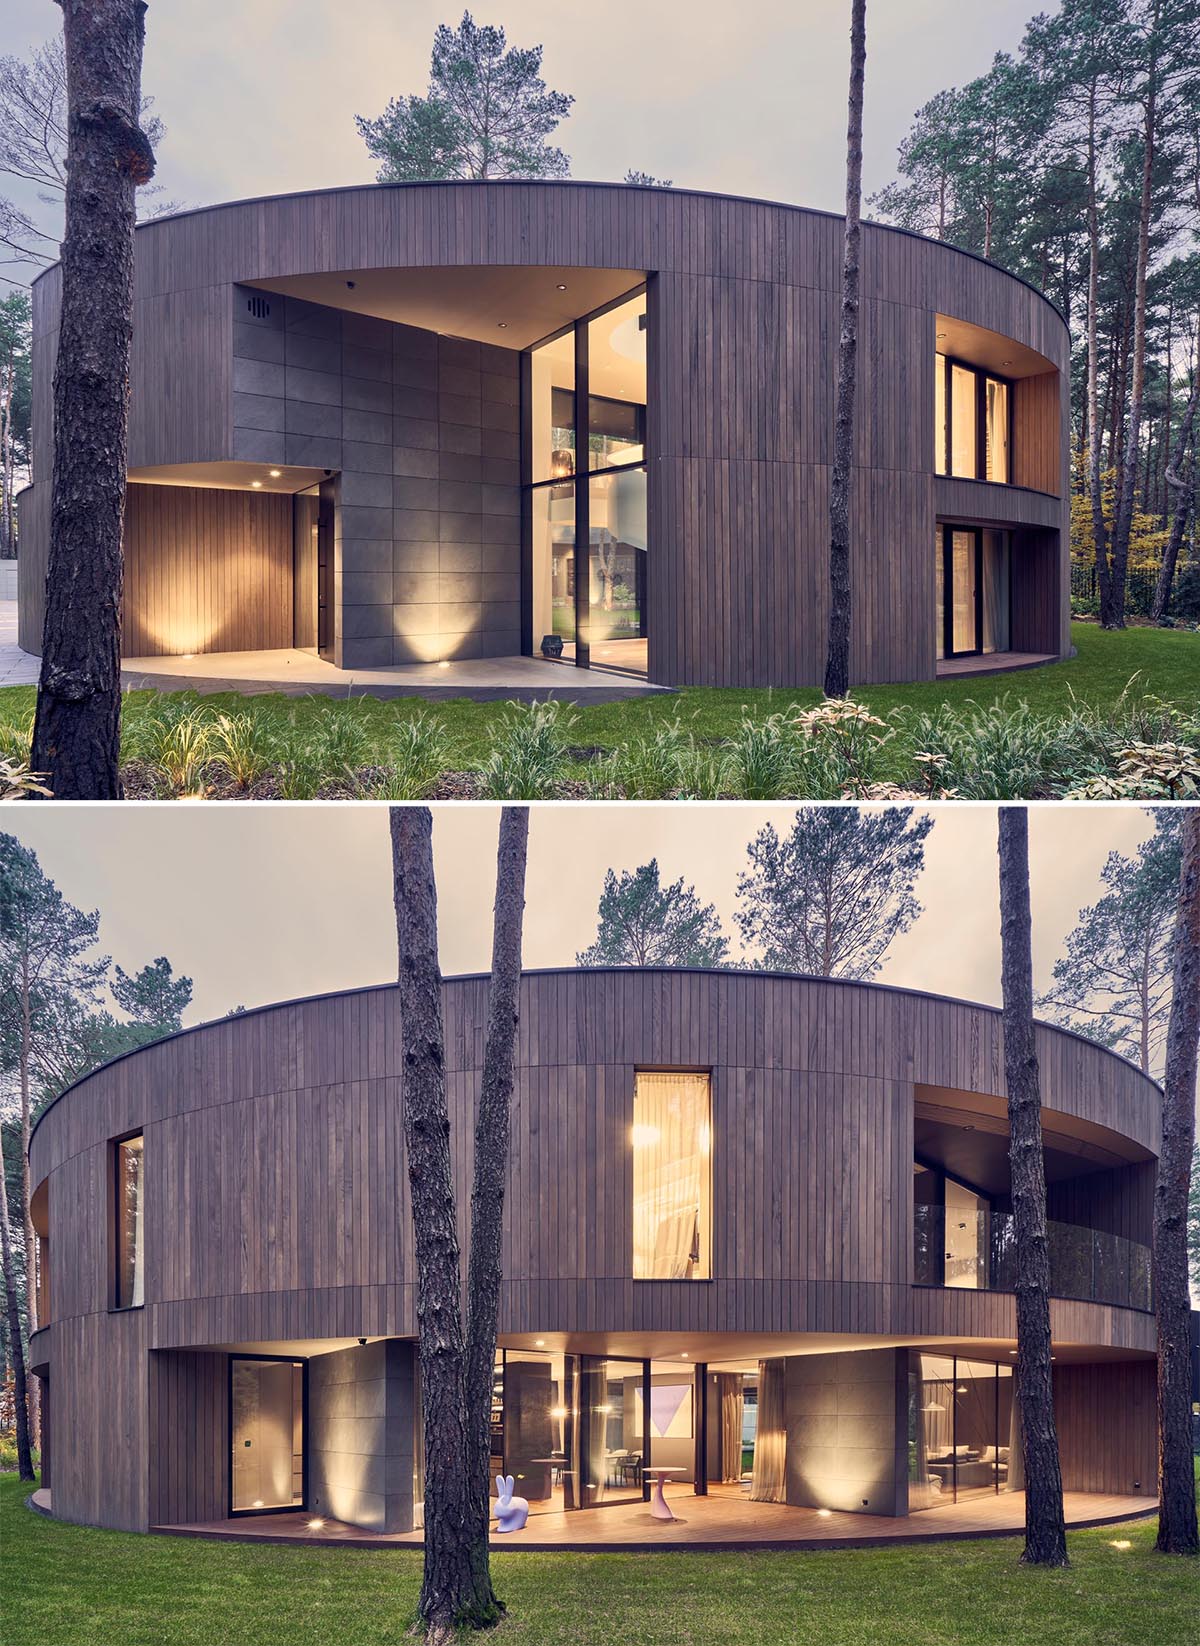 A modern circular home with a warm wood exterior that complements the surrounding forest.